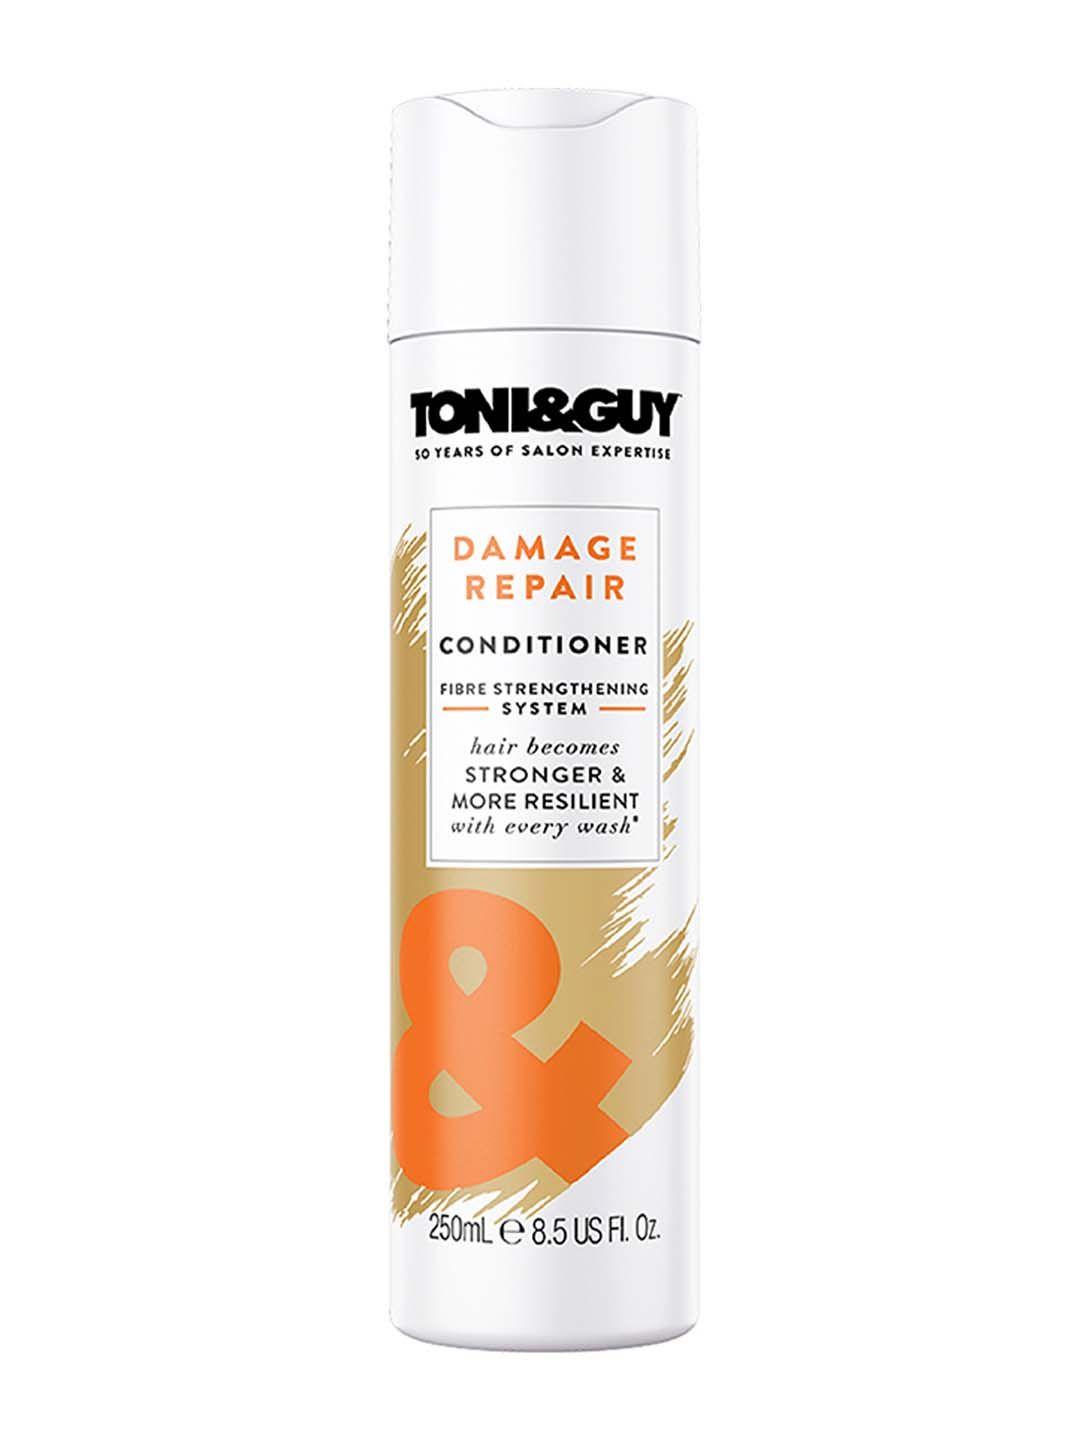 toni & guy damage repair conditioner for coloured hair - 250ml